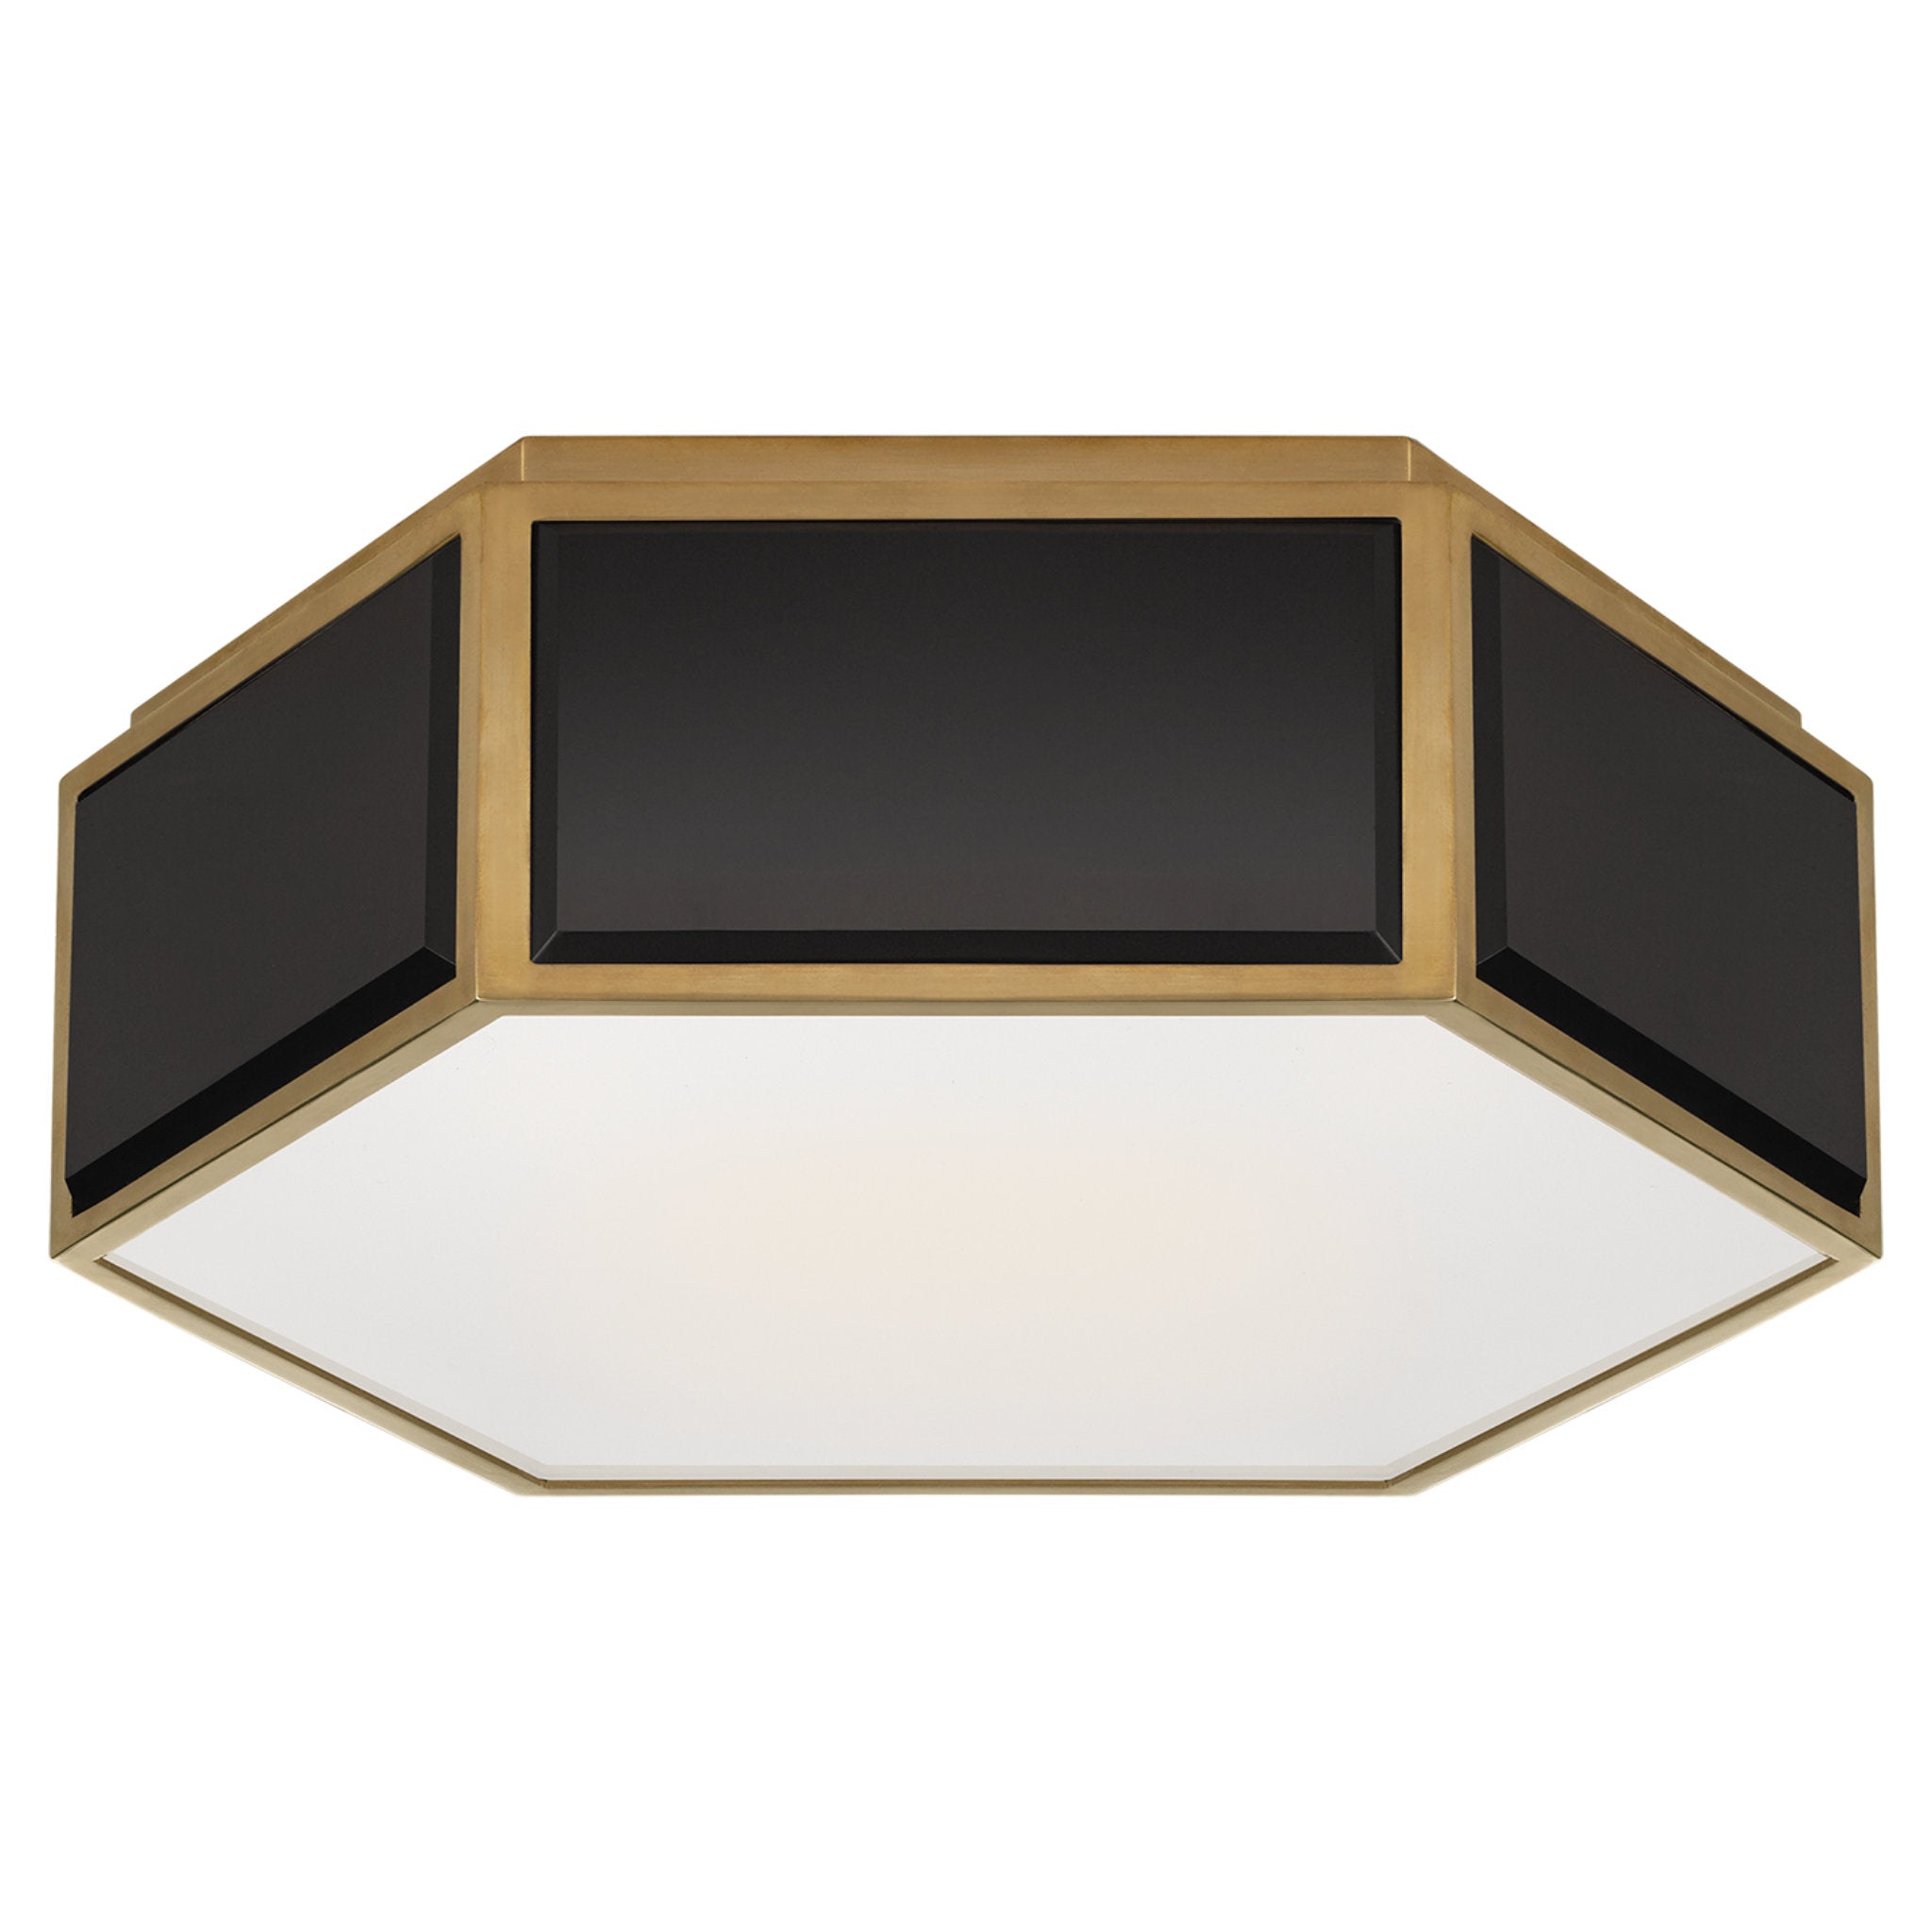 kate spade new york Bradford Small Hexagonal Flush Mount in Black and Soft Brass with Frosted Glass